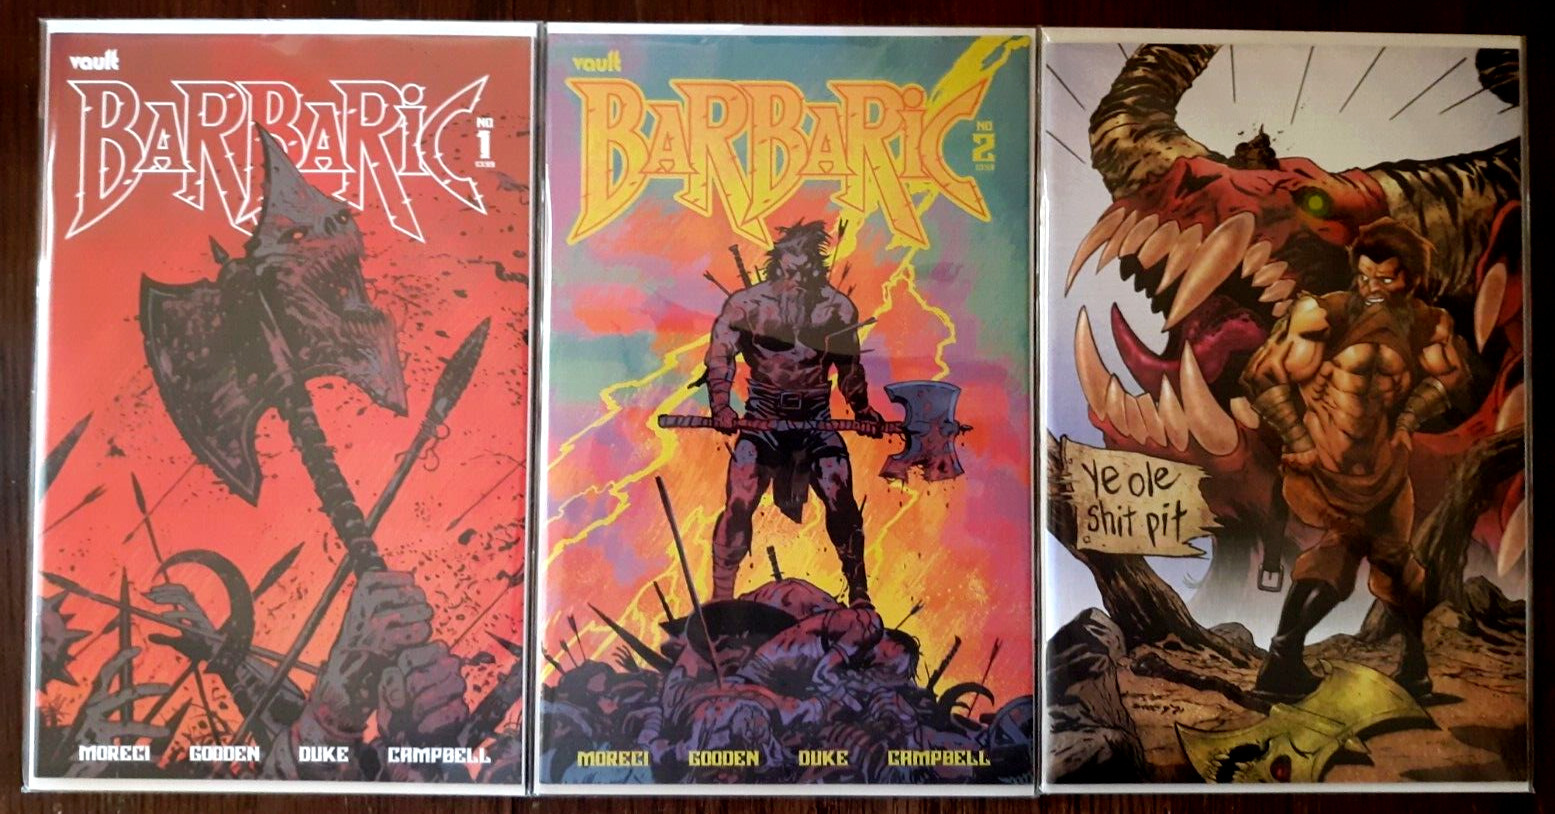 BARBARIC #1-3 (2021 Vault) FIRST APPEARANCES OF OWEN AND THE AXE *FREE SHIPPING*